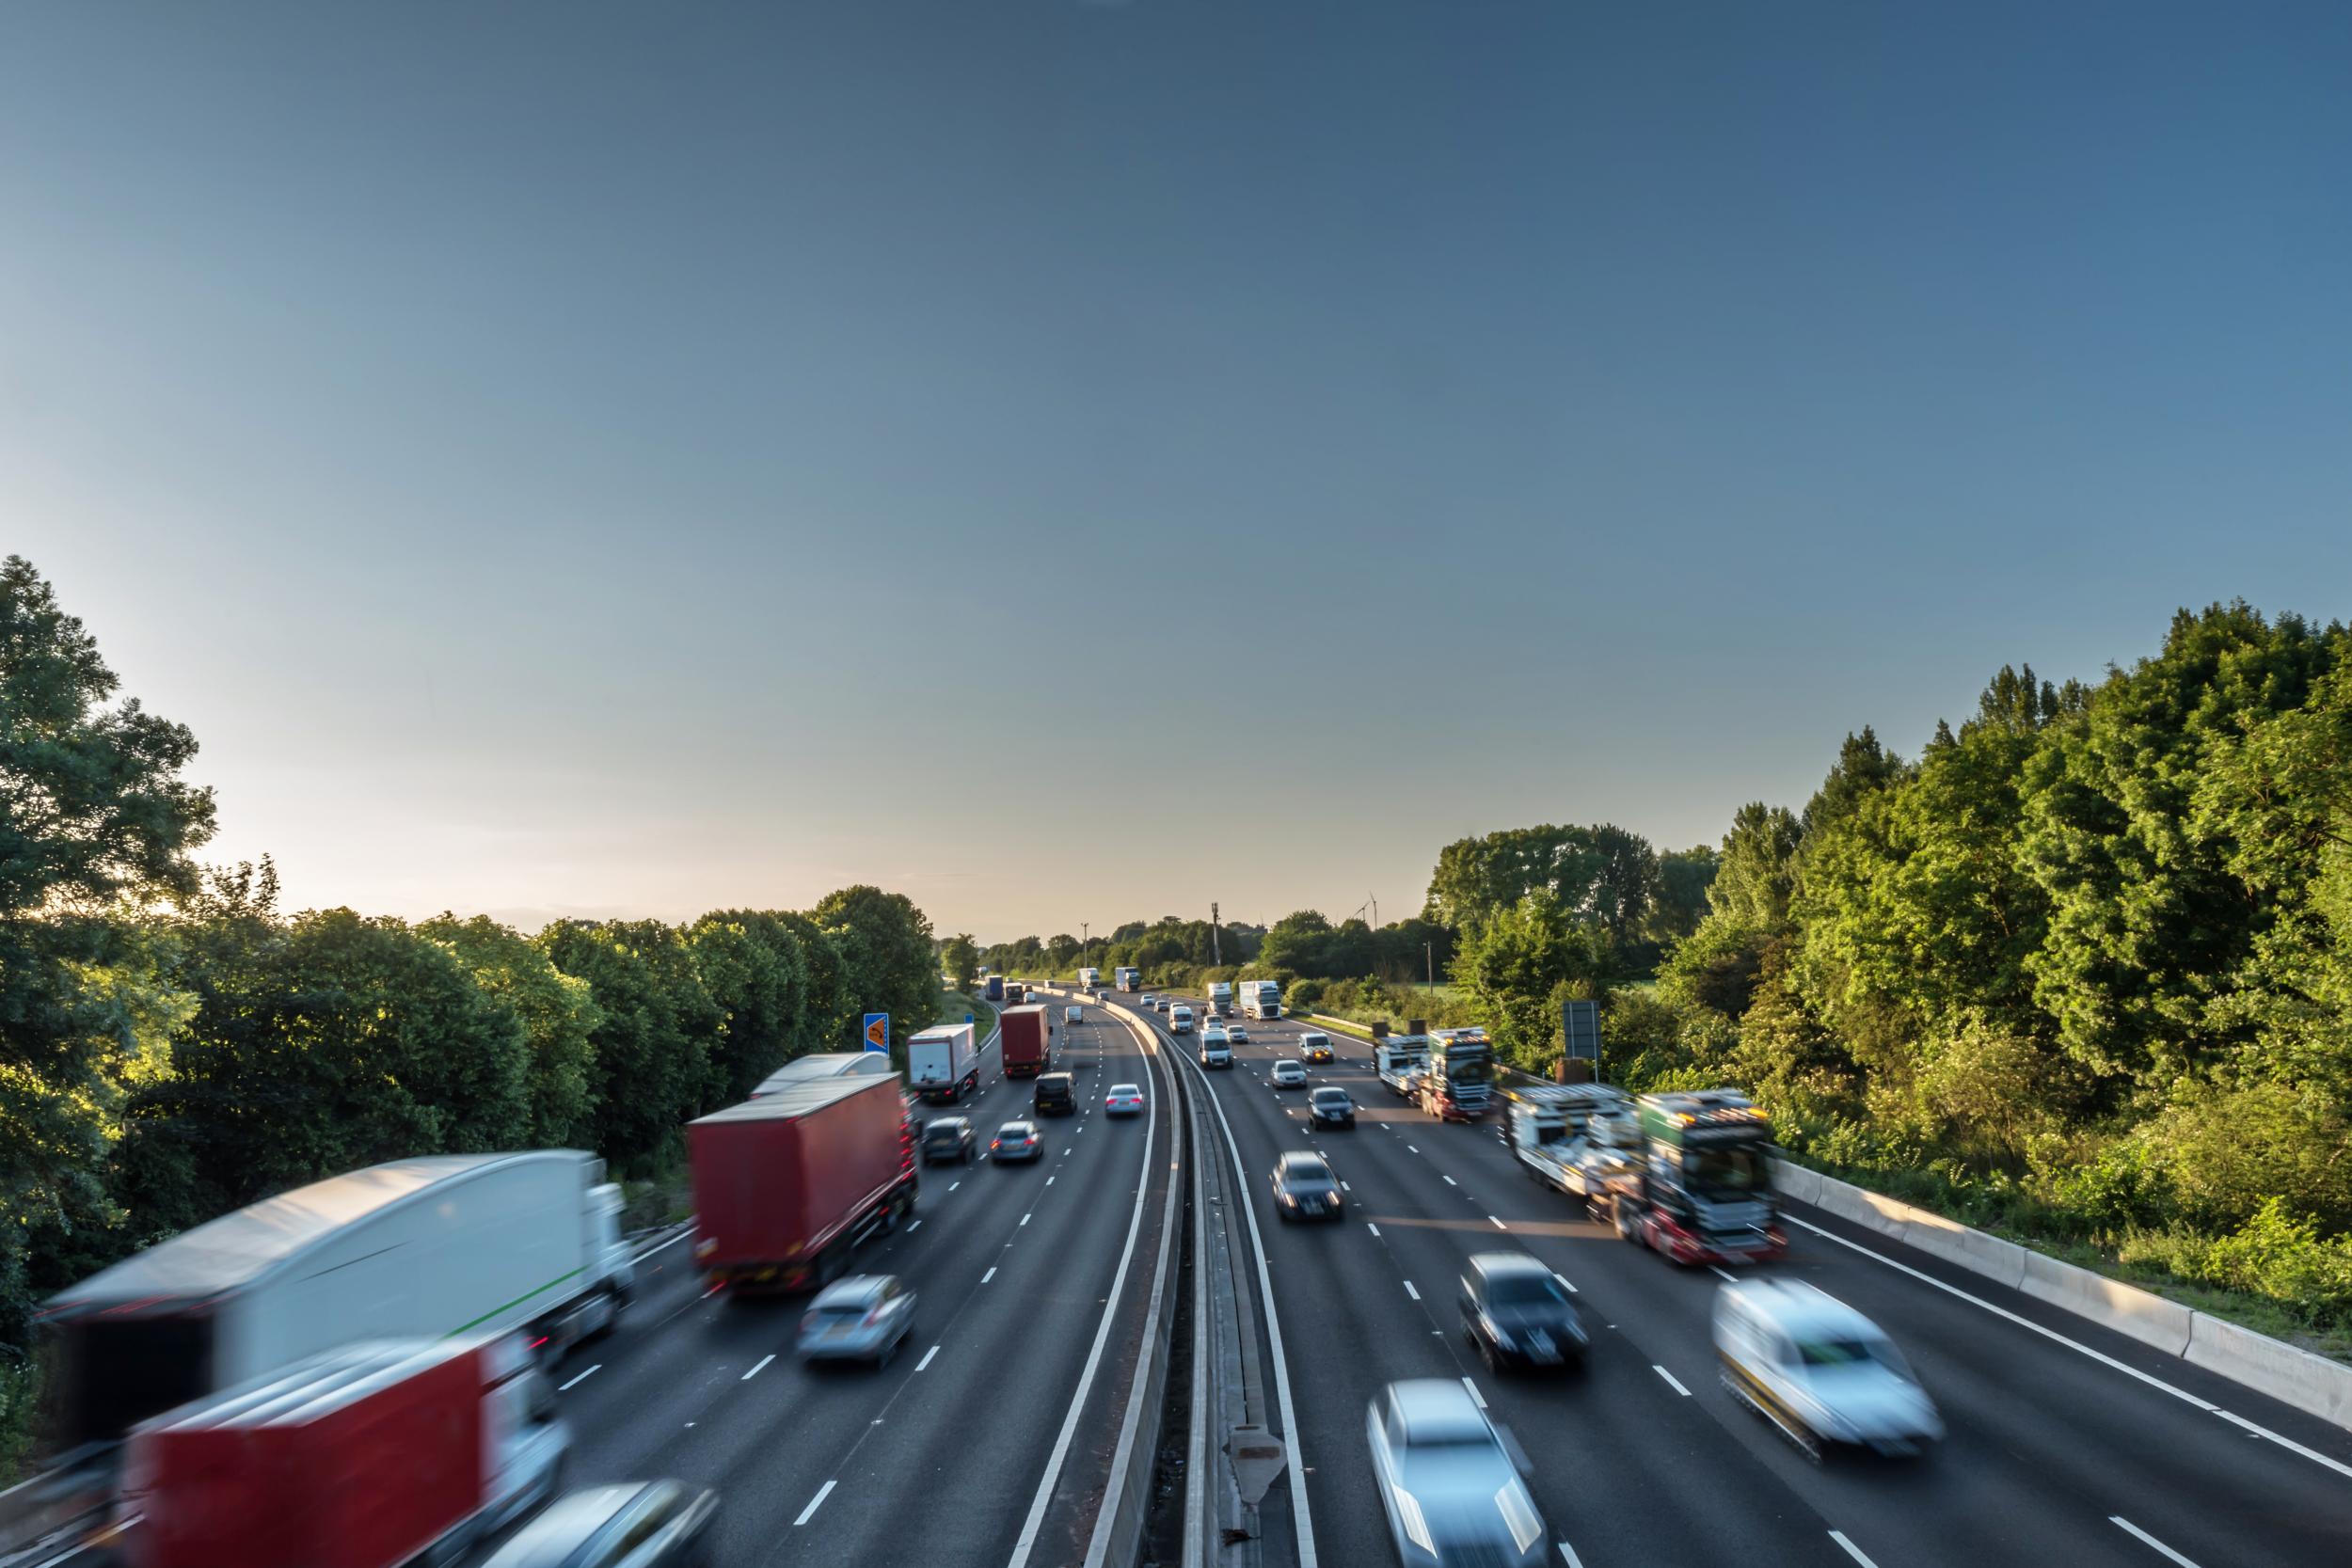 The new powers will come into force from ‘late summer’, Highways England says